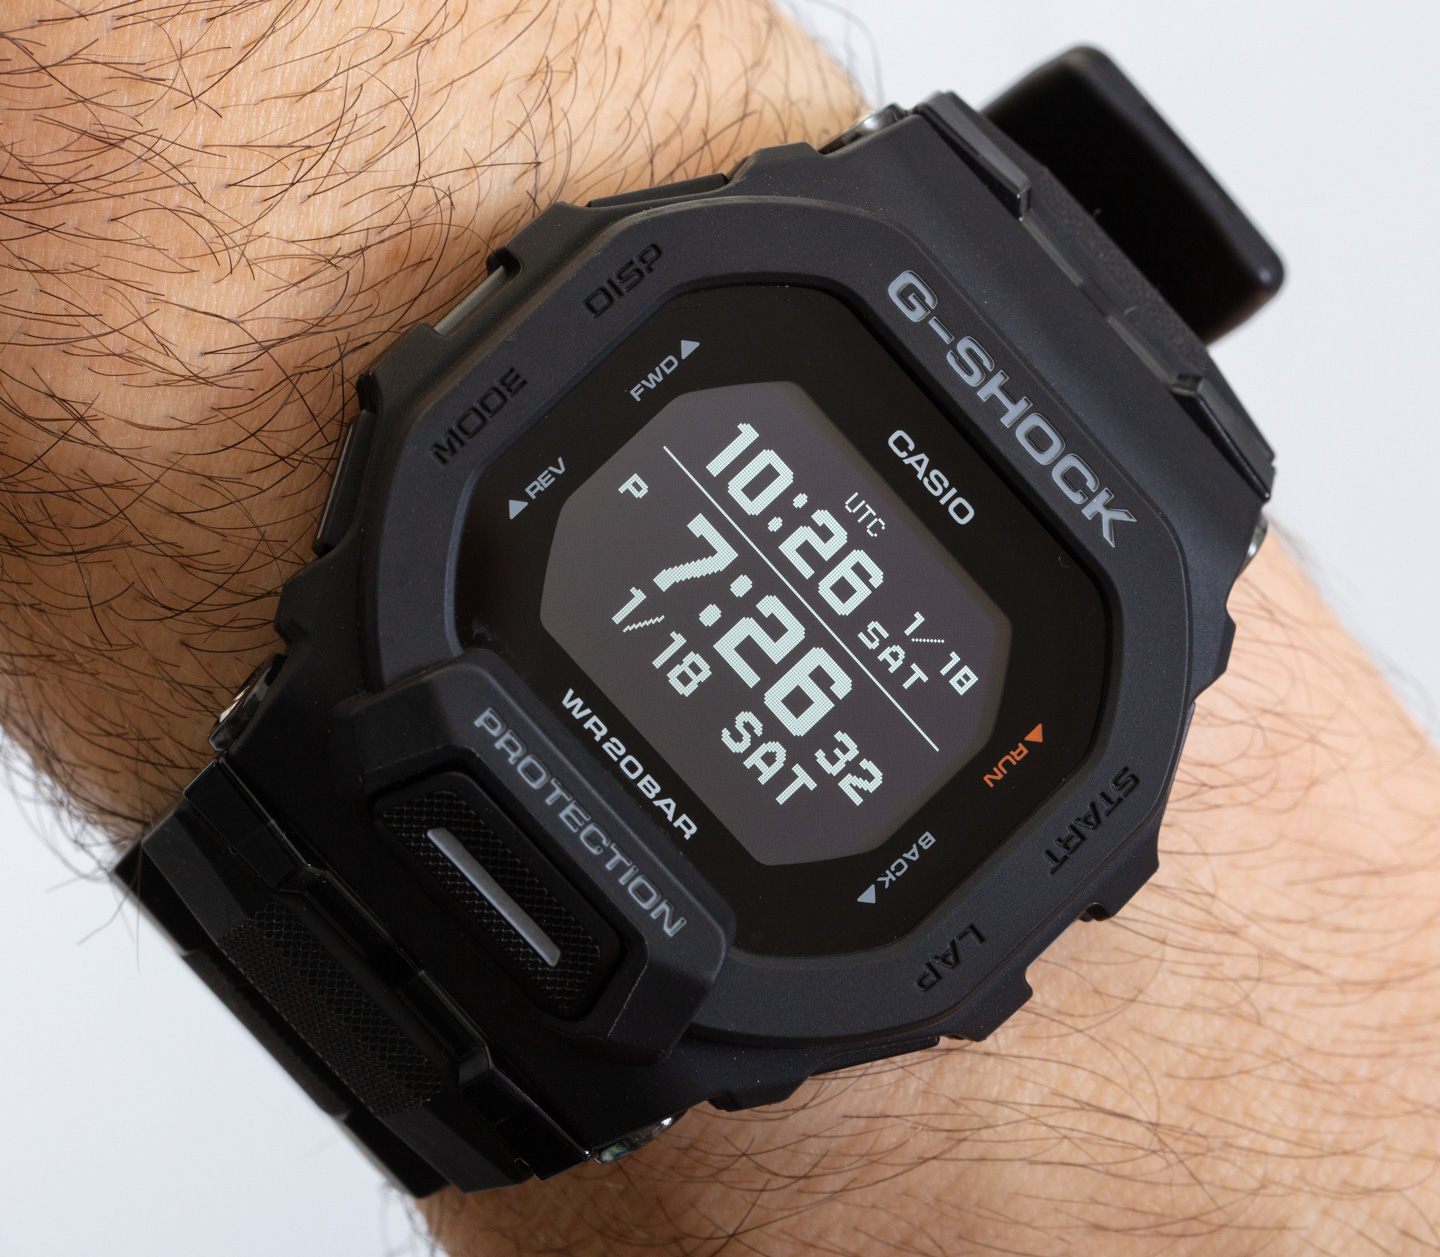 Watch Review: Casio GBD200 Entry-Level Bluetooth MiP G-Shock MOVE